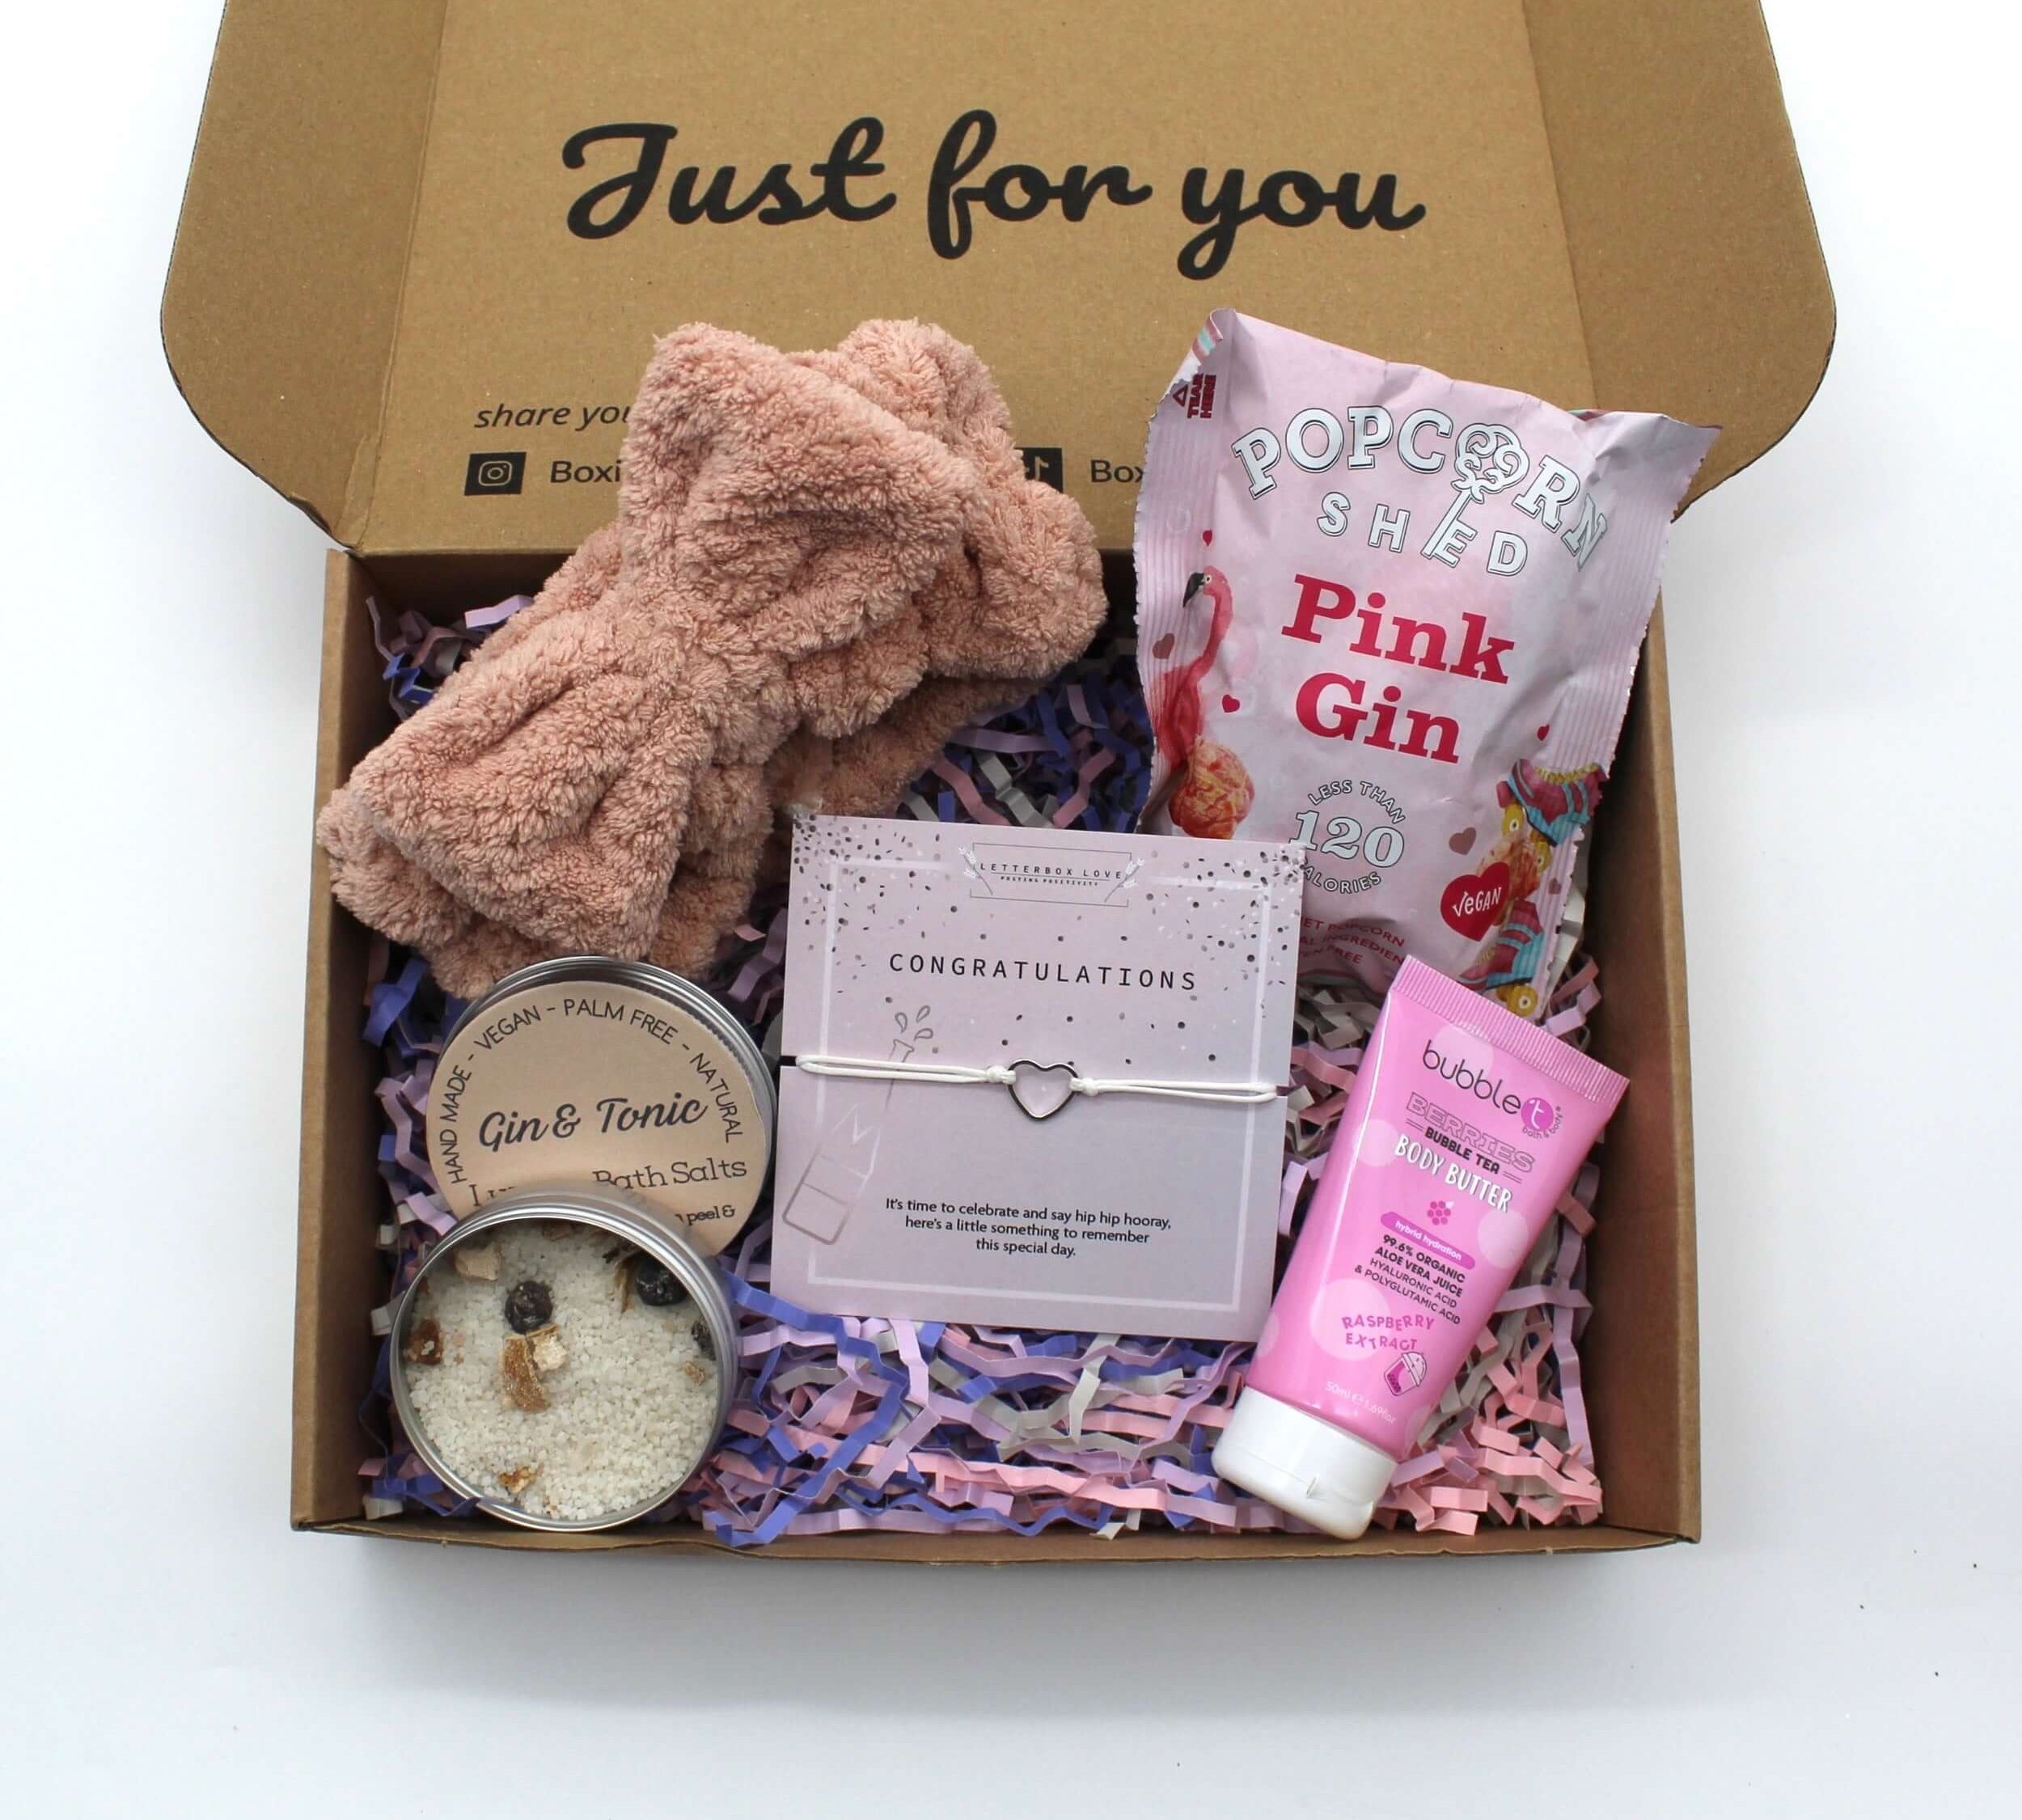 Congrats you did it! gift box includes pink spa bow head band, 50g luxury bath salts, pink gin popcorn, berries body butter and congratulations heart bracelet.  